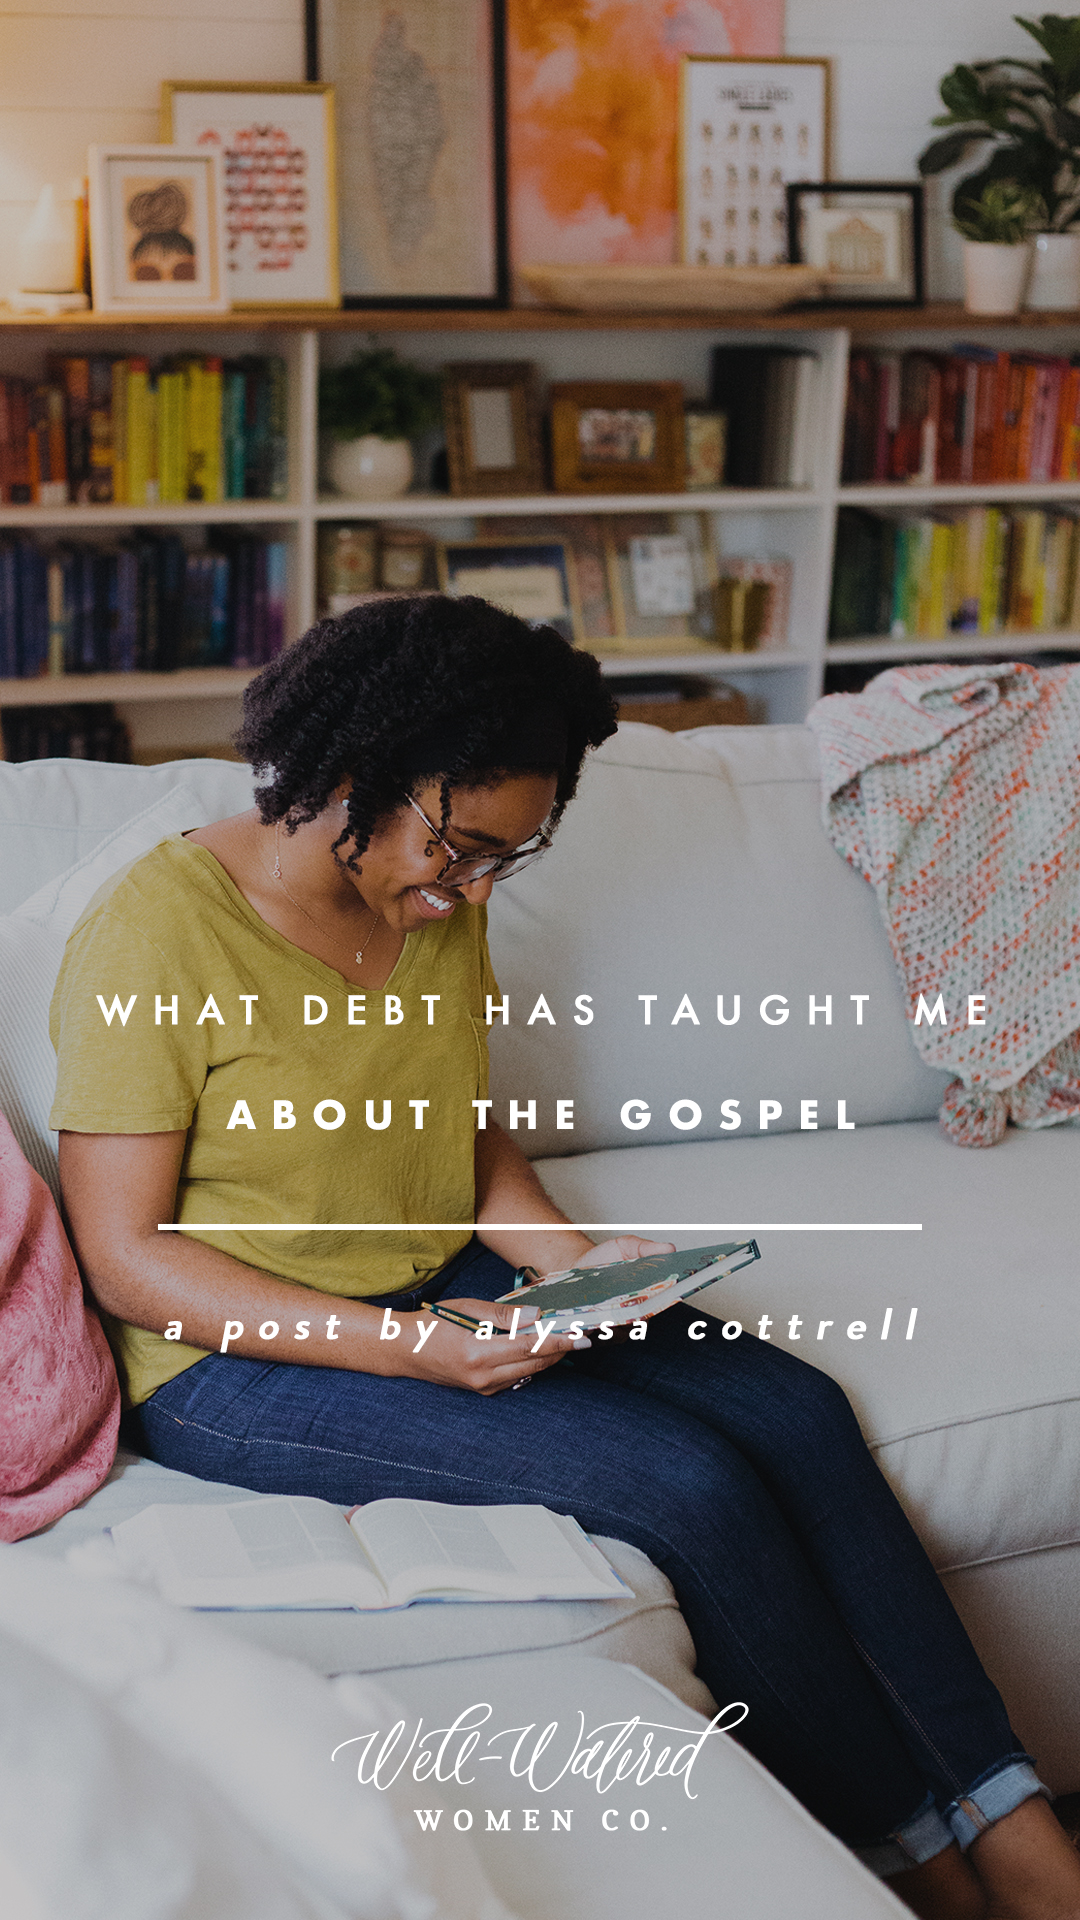 Well-Watered Women Blog - What Debt Has Taught Me About the Gospel